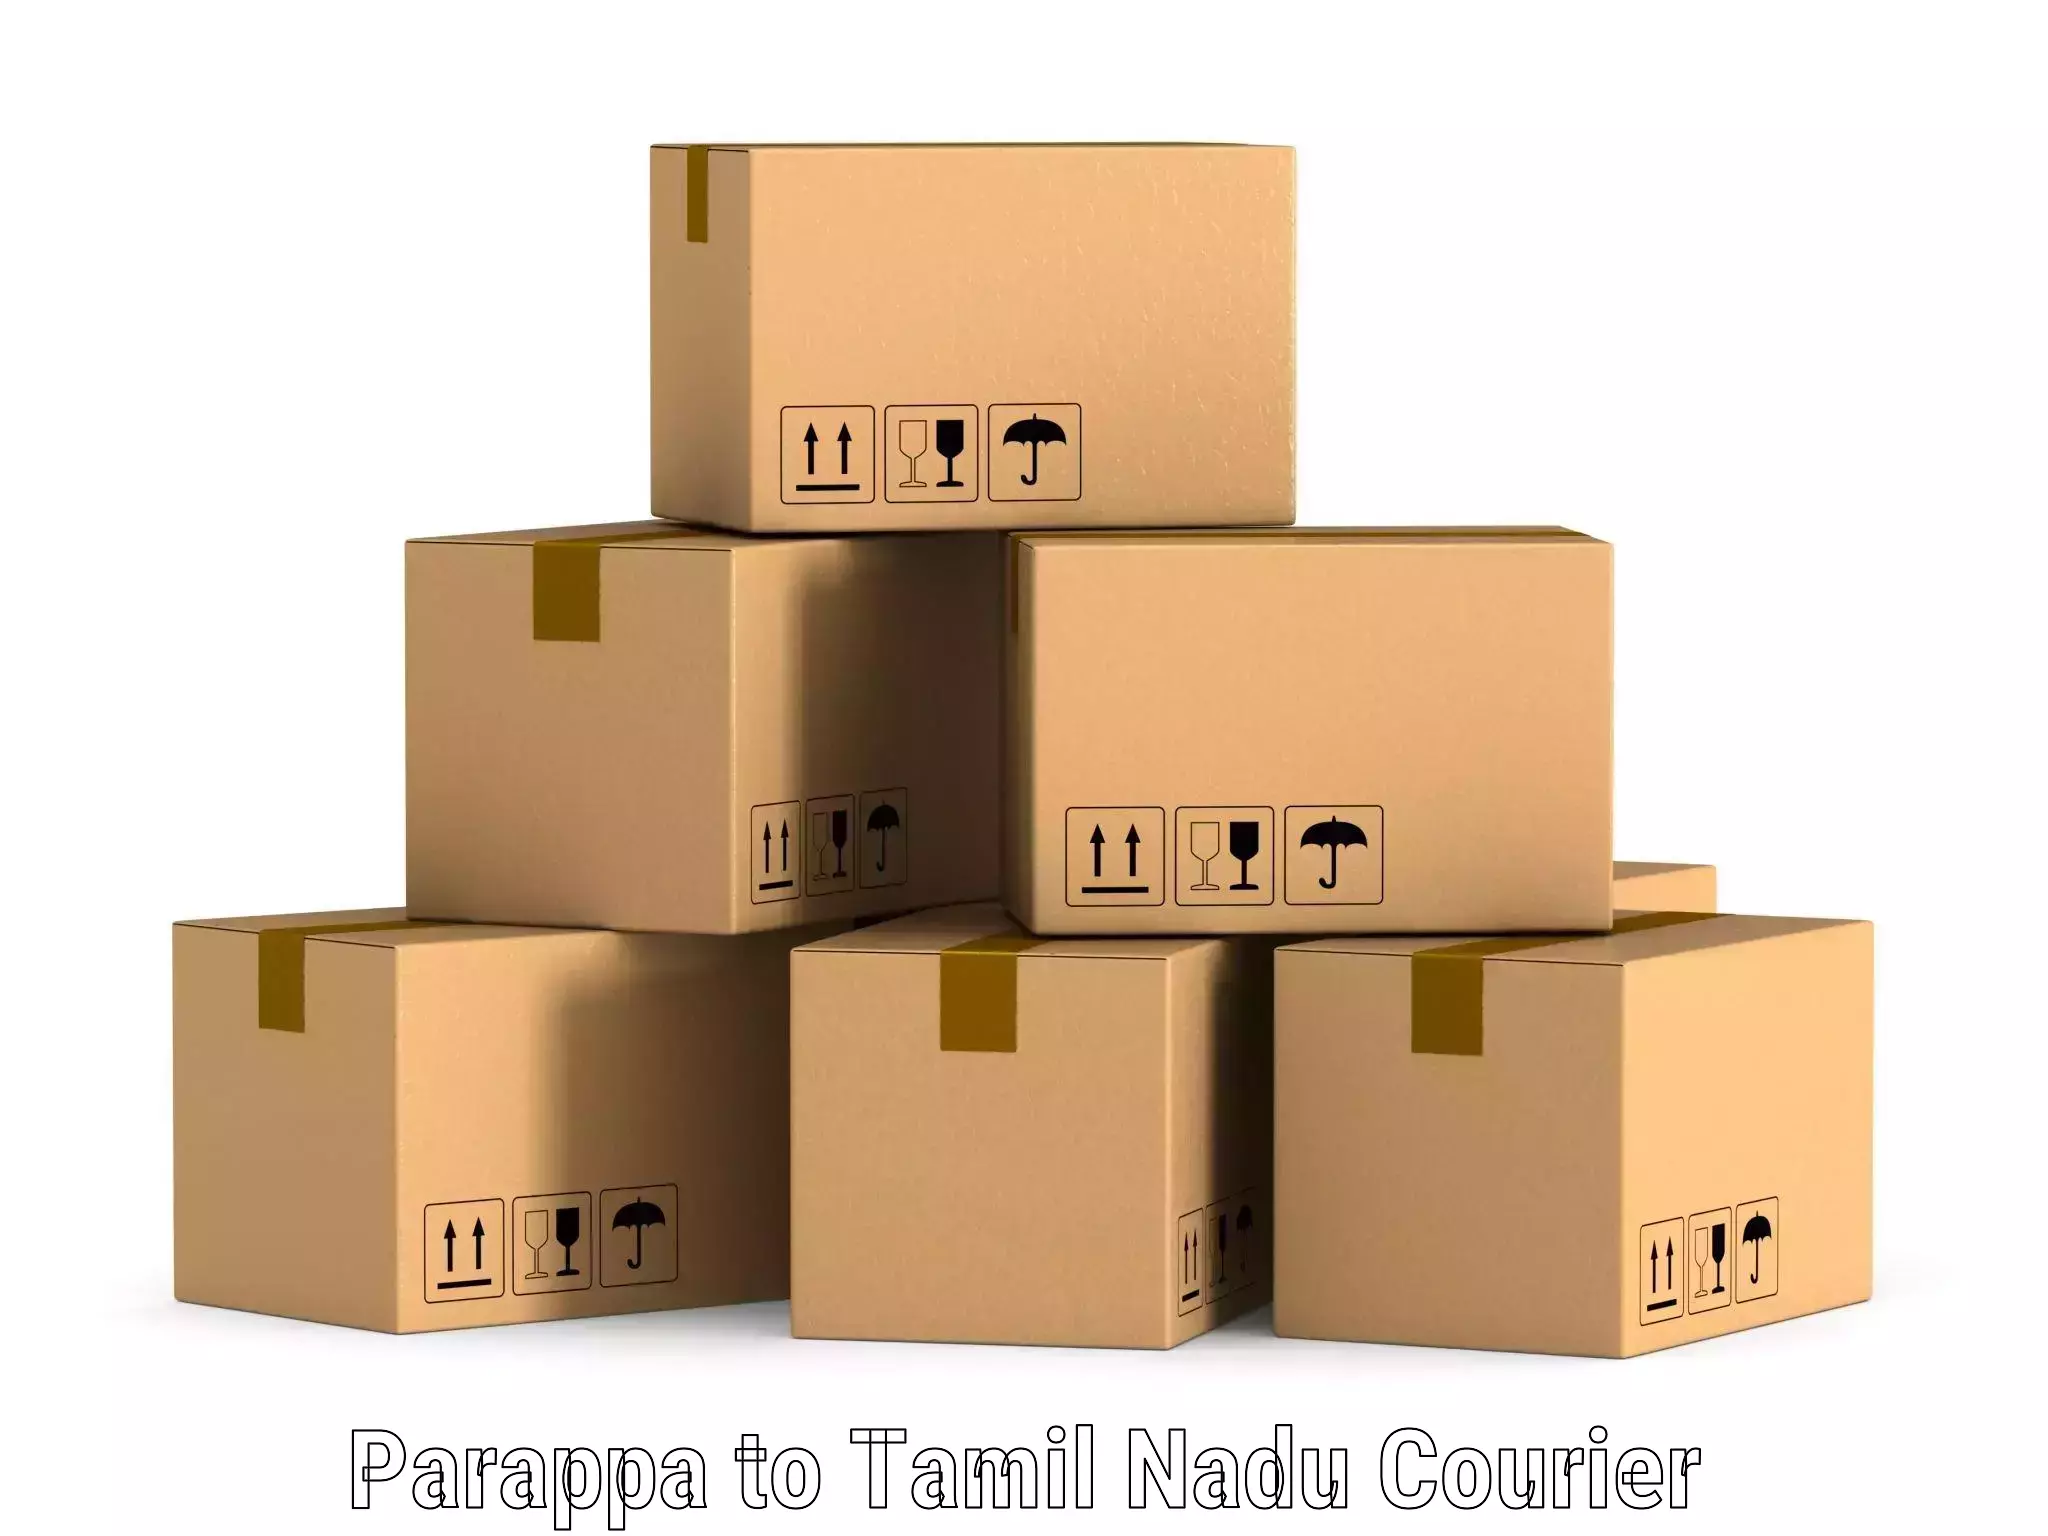 Online package tracking Parappa to Chennai Port